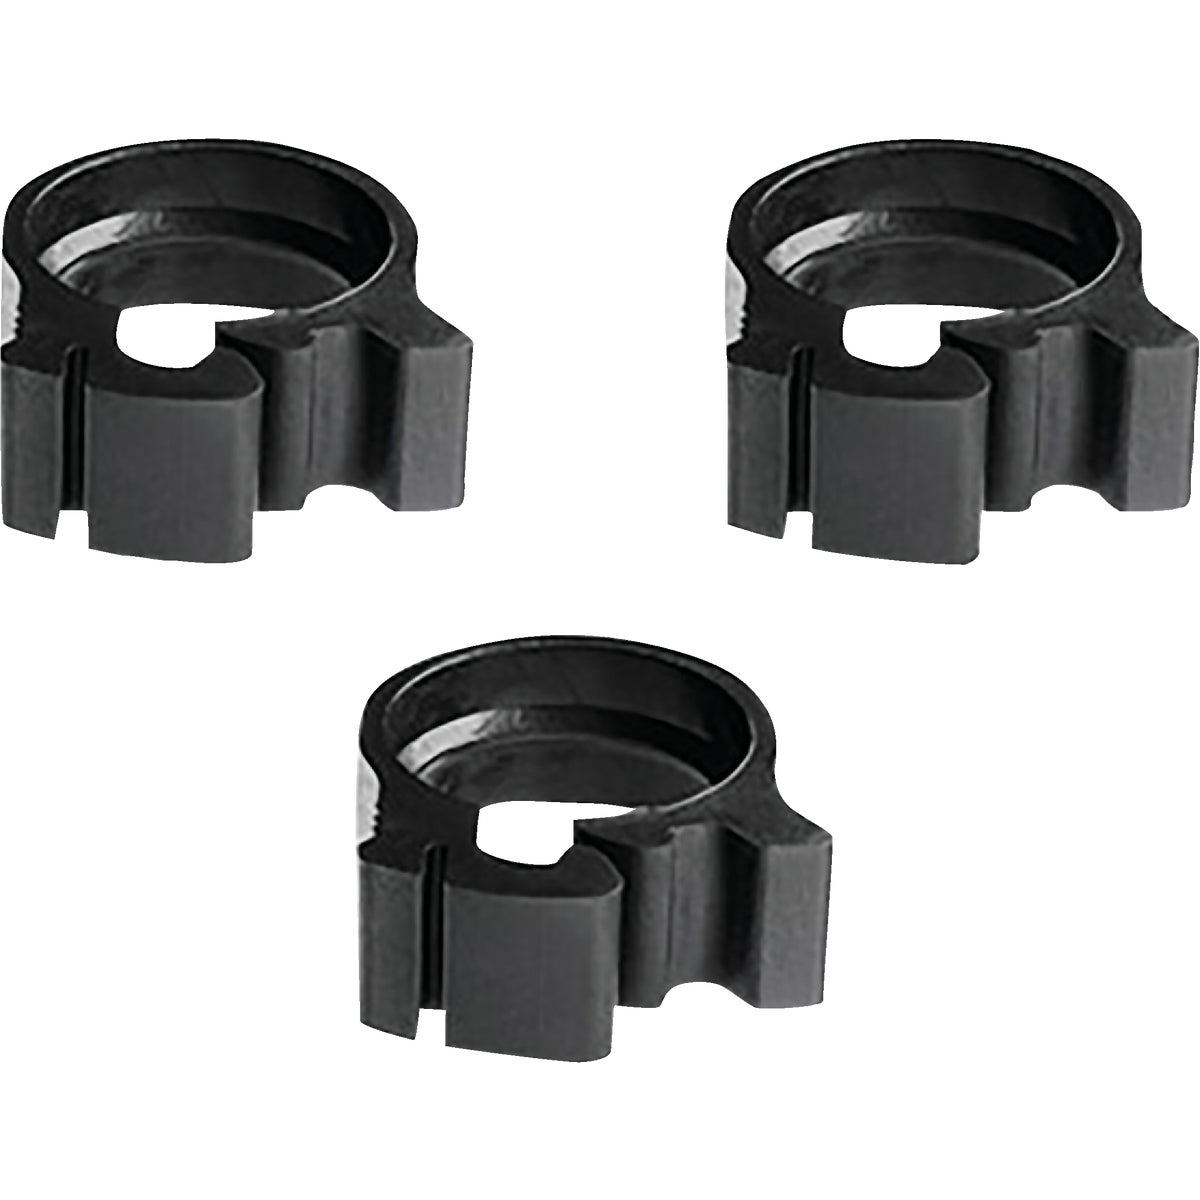 Flair-It PEXLock 1 In. Poly-Alloy Compression PEX Crimp Ring (3-Pack)